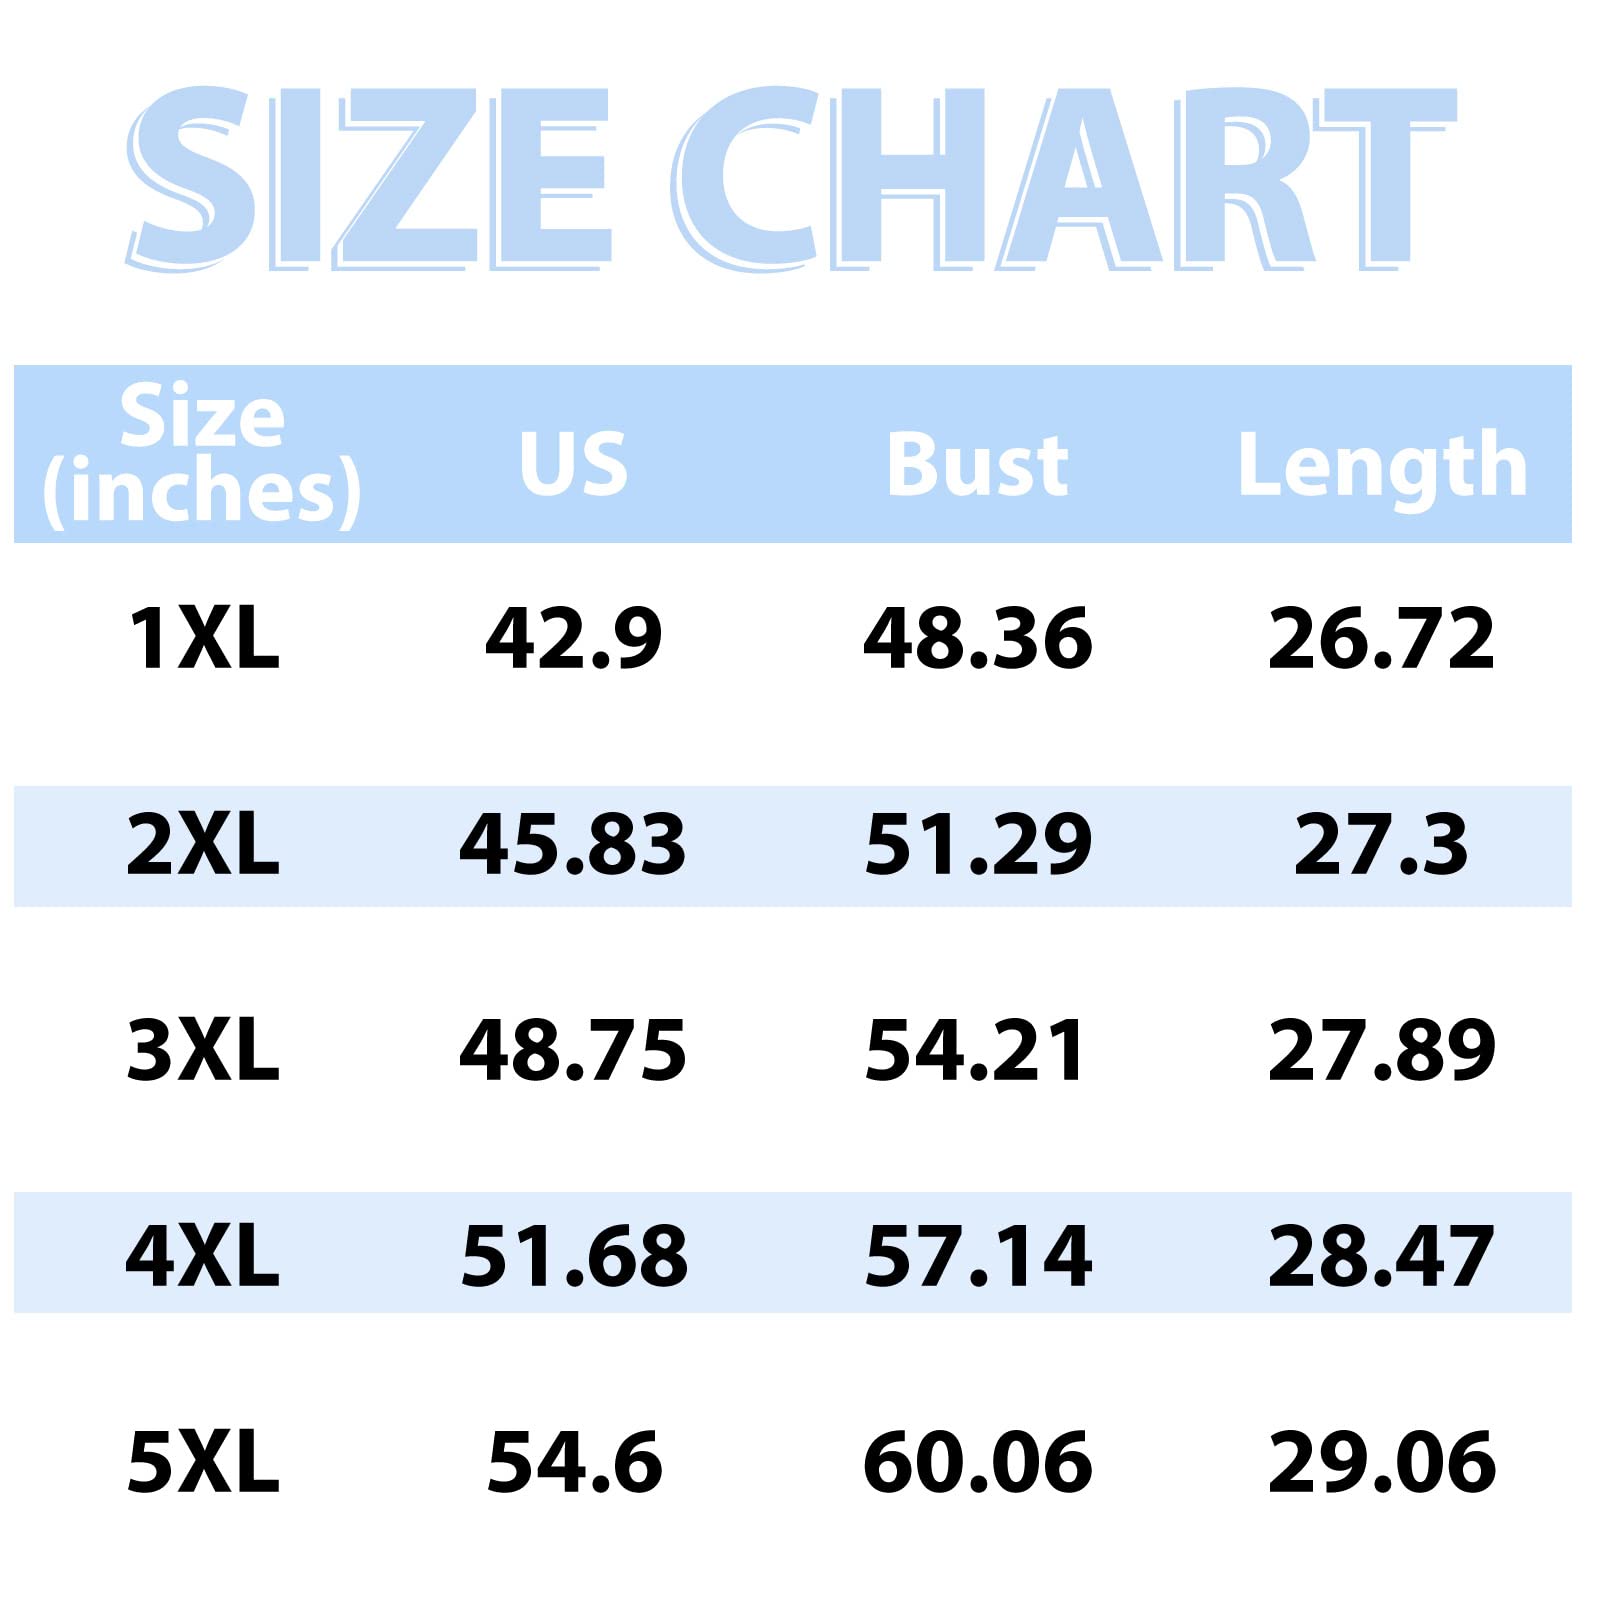 Plus Size Tank Tops for Women Summer Sleeveless T-Shirts Loose-White - Moon Wood